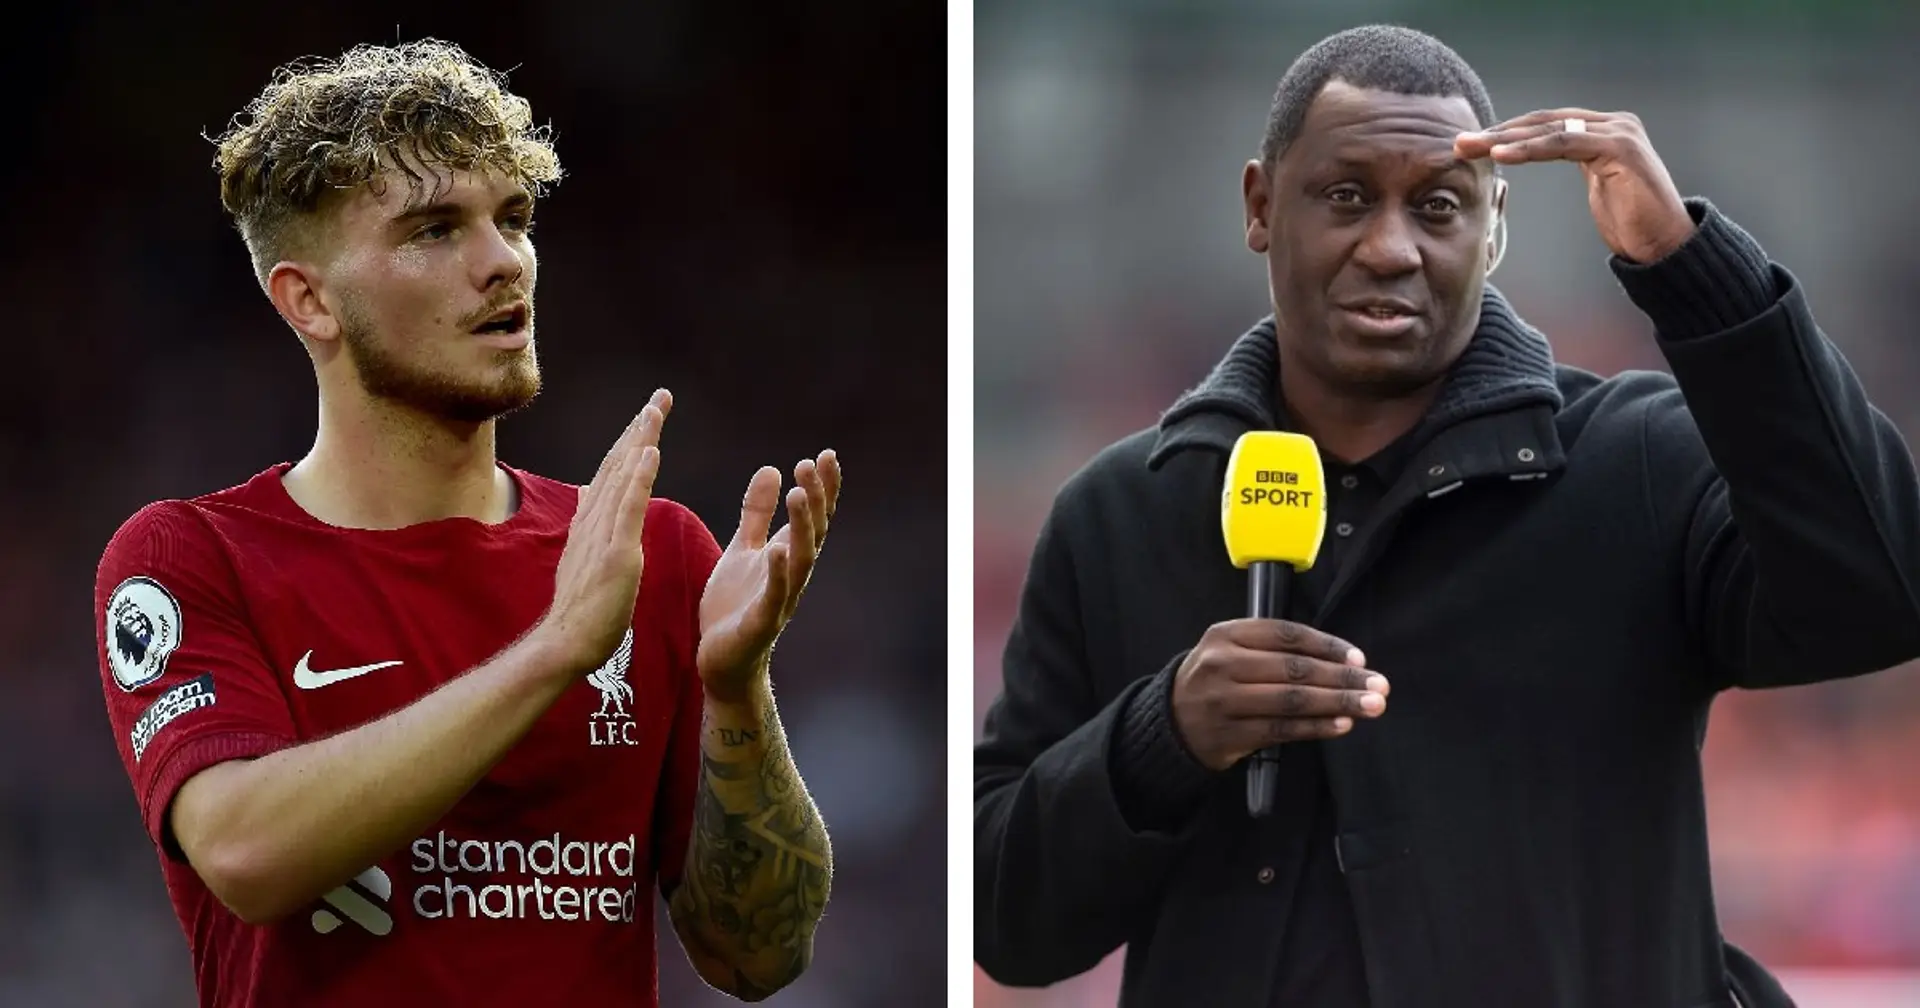 Heskey believes Liverpool are going to have 2 'frightening' midfielders next year